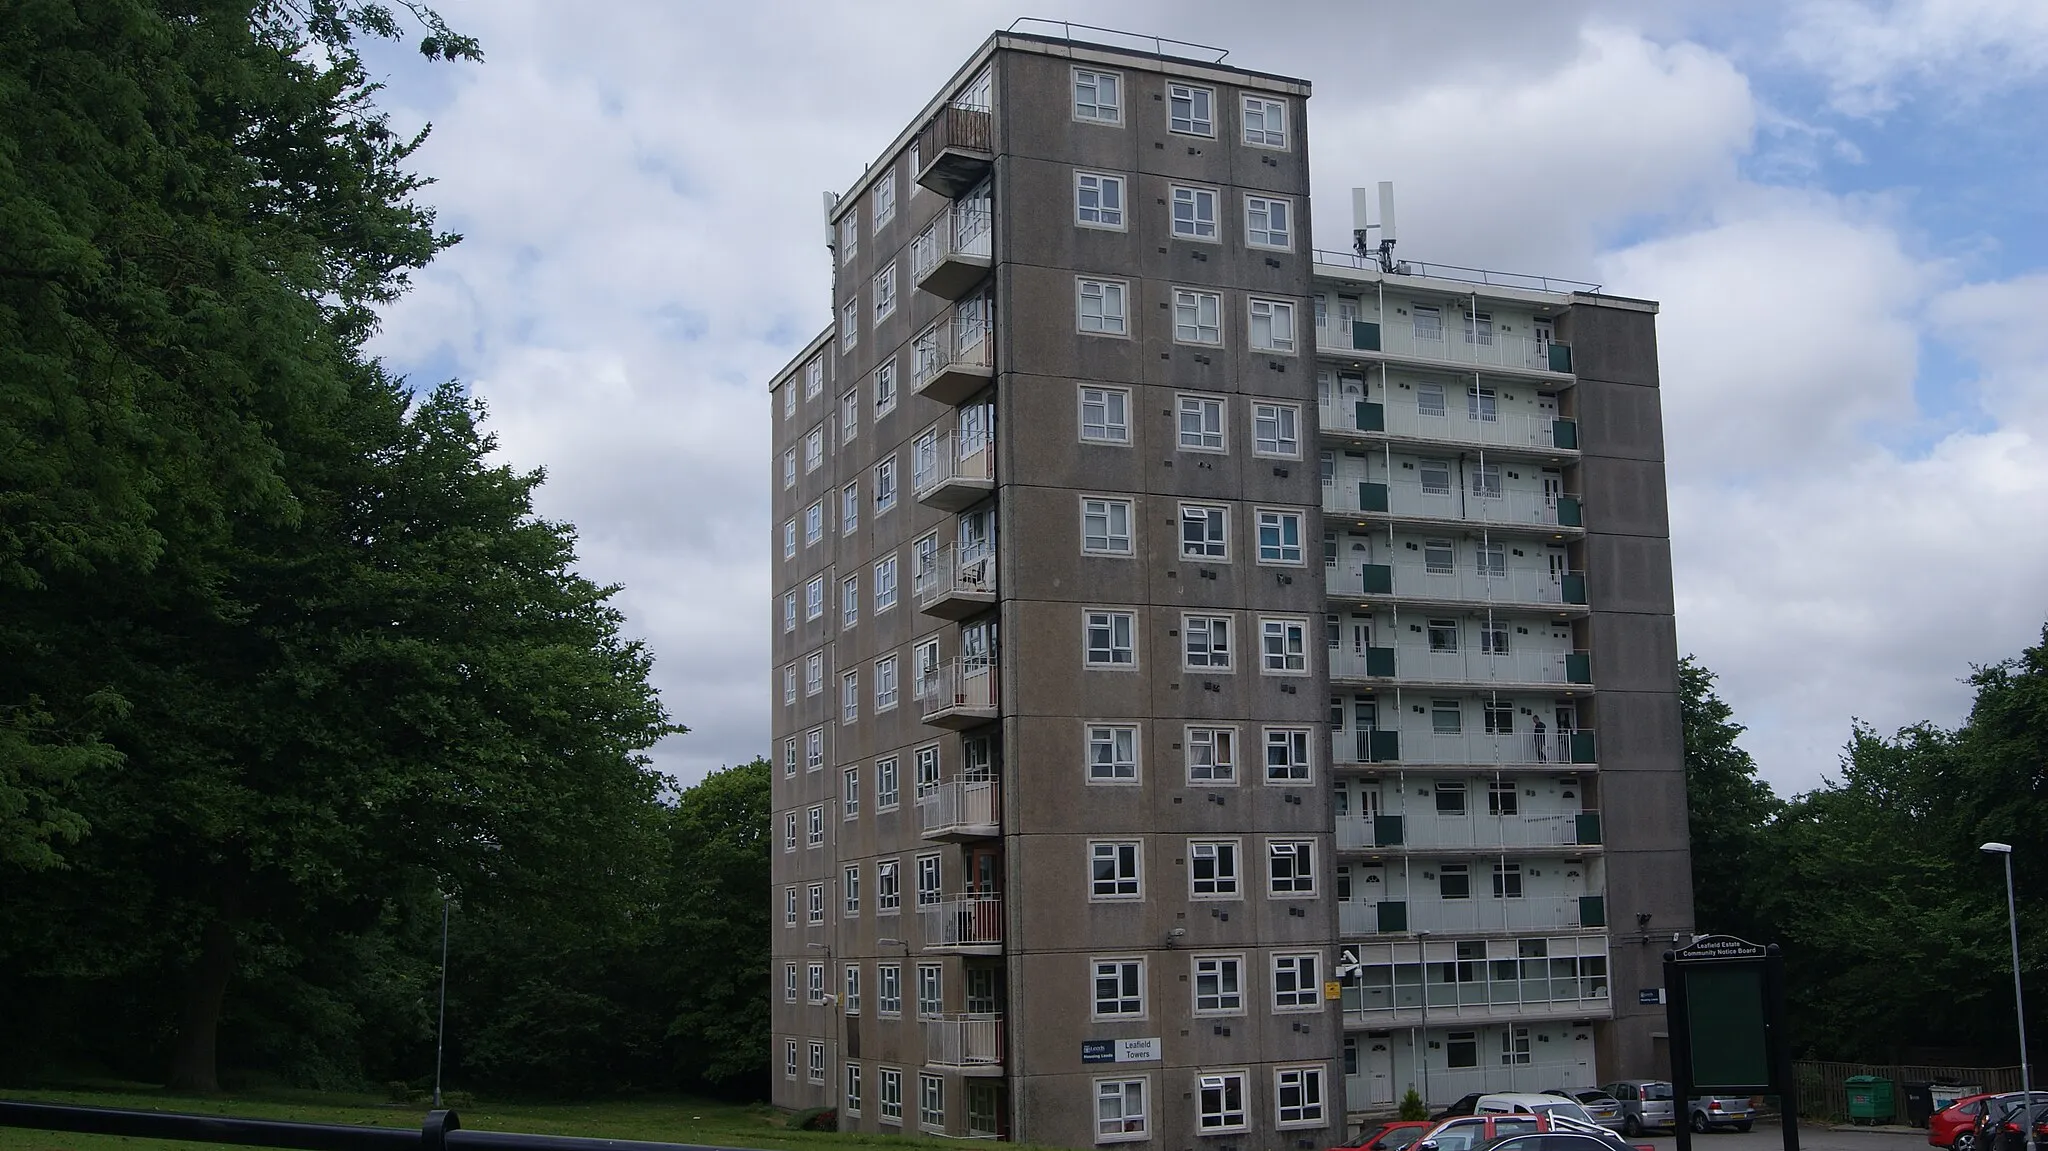 Photo showing: Leafield Towers, Moor Allerton, Leeds, West Yorkshire.  Taken around midday on Saturday the 23rd of May 2020.